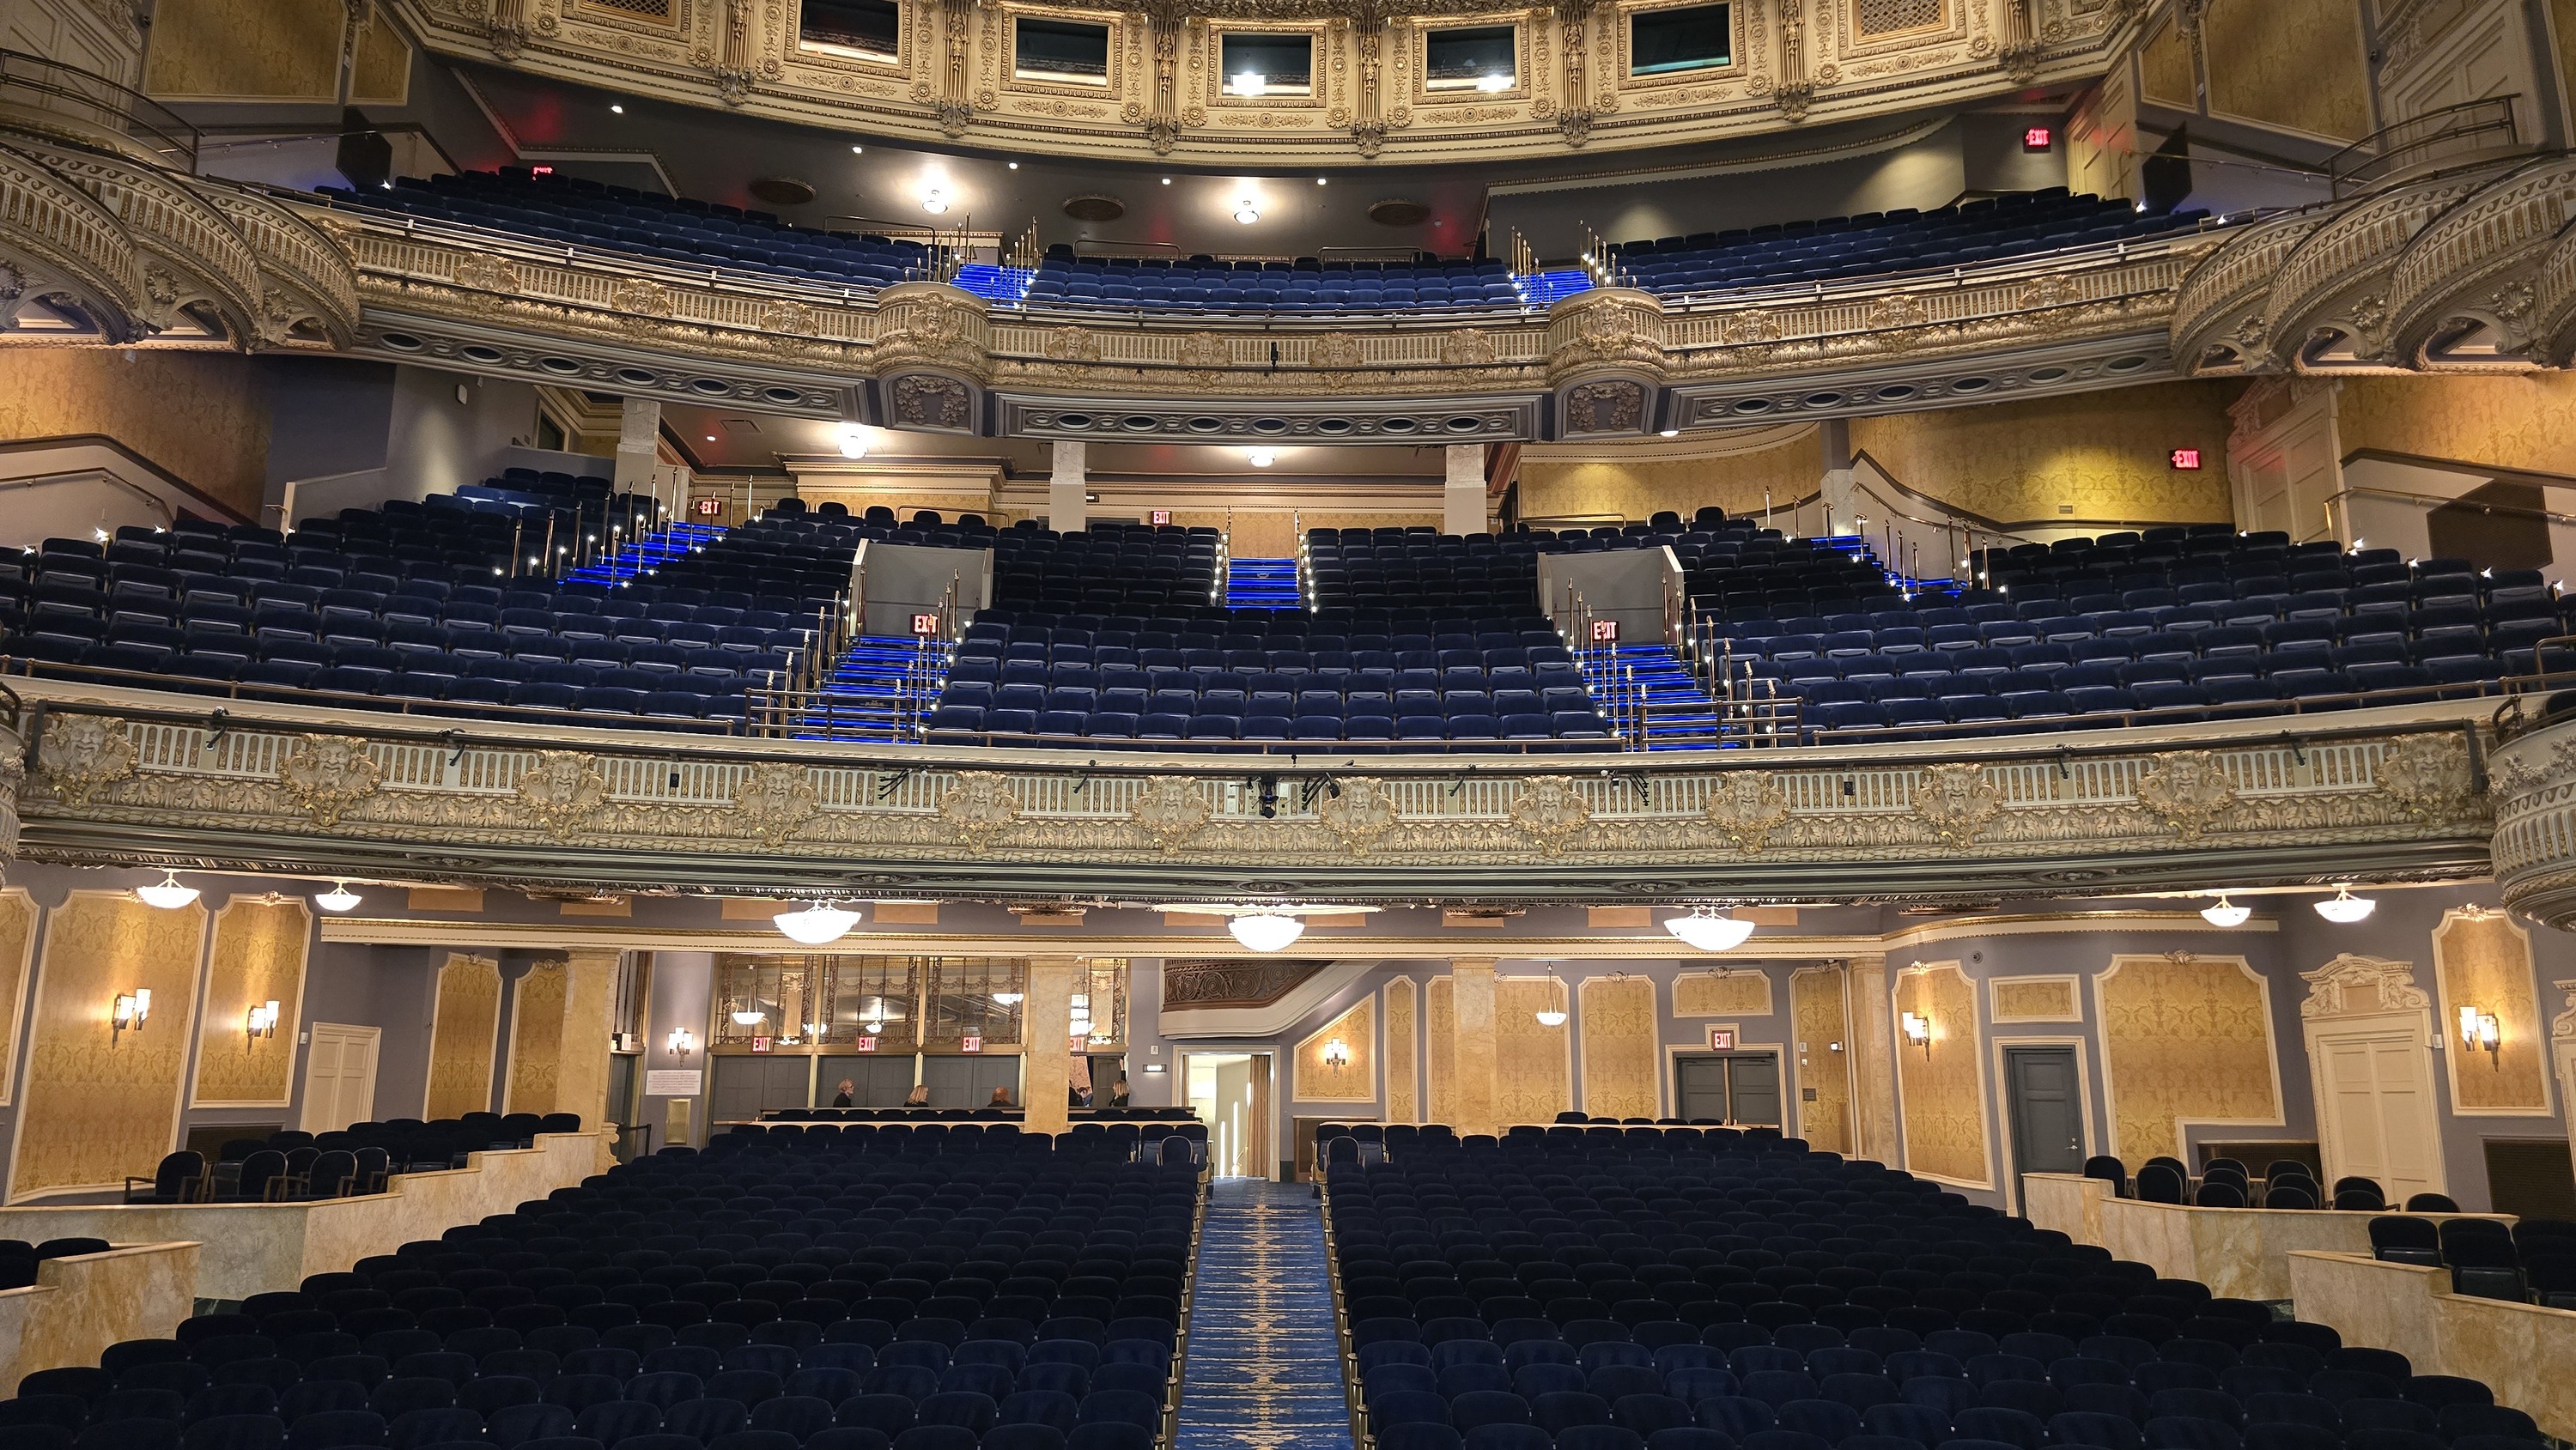 See inside the beautifully renovated Palace Theatre on Broadway